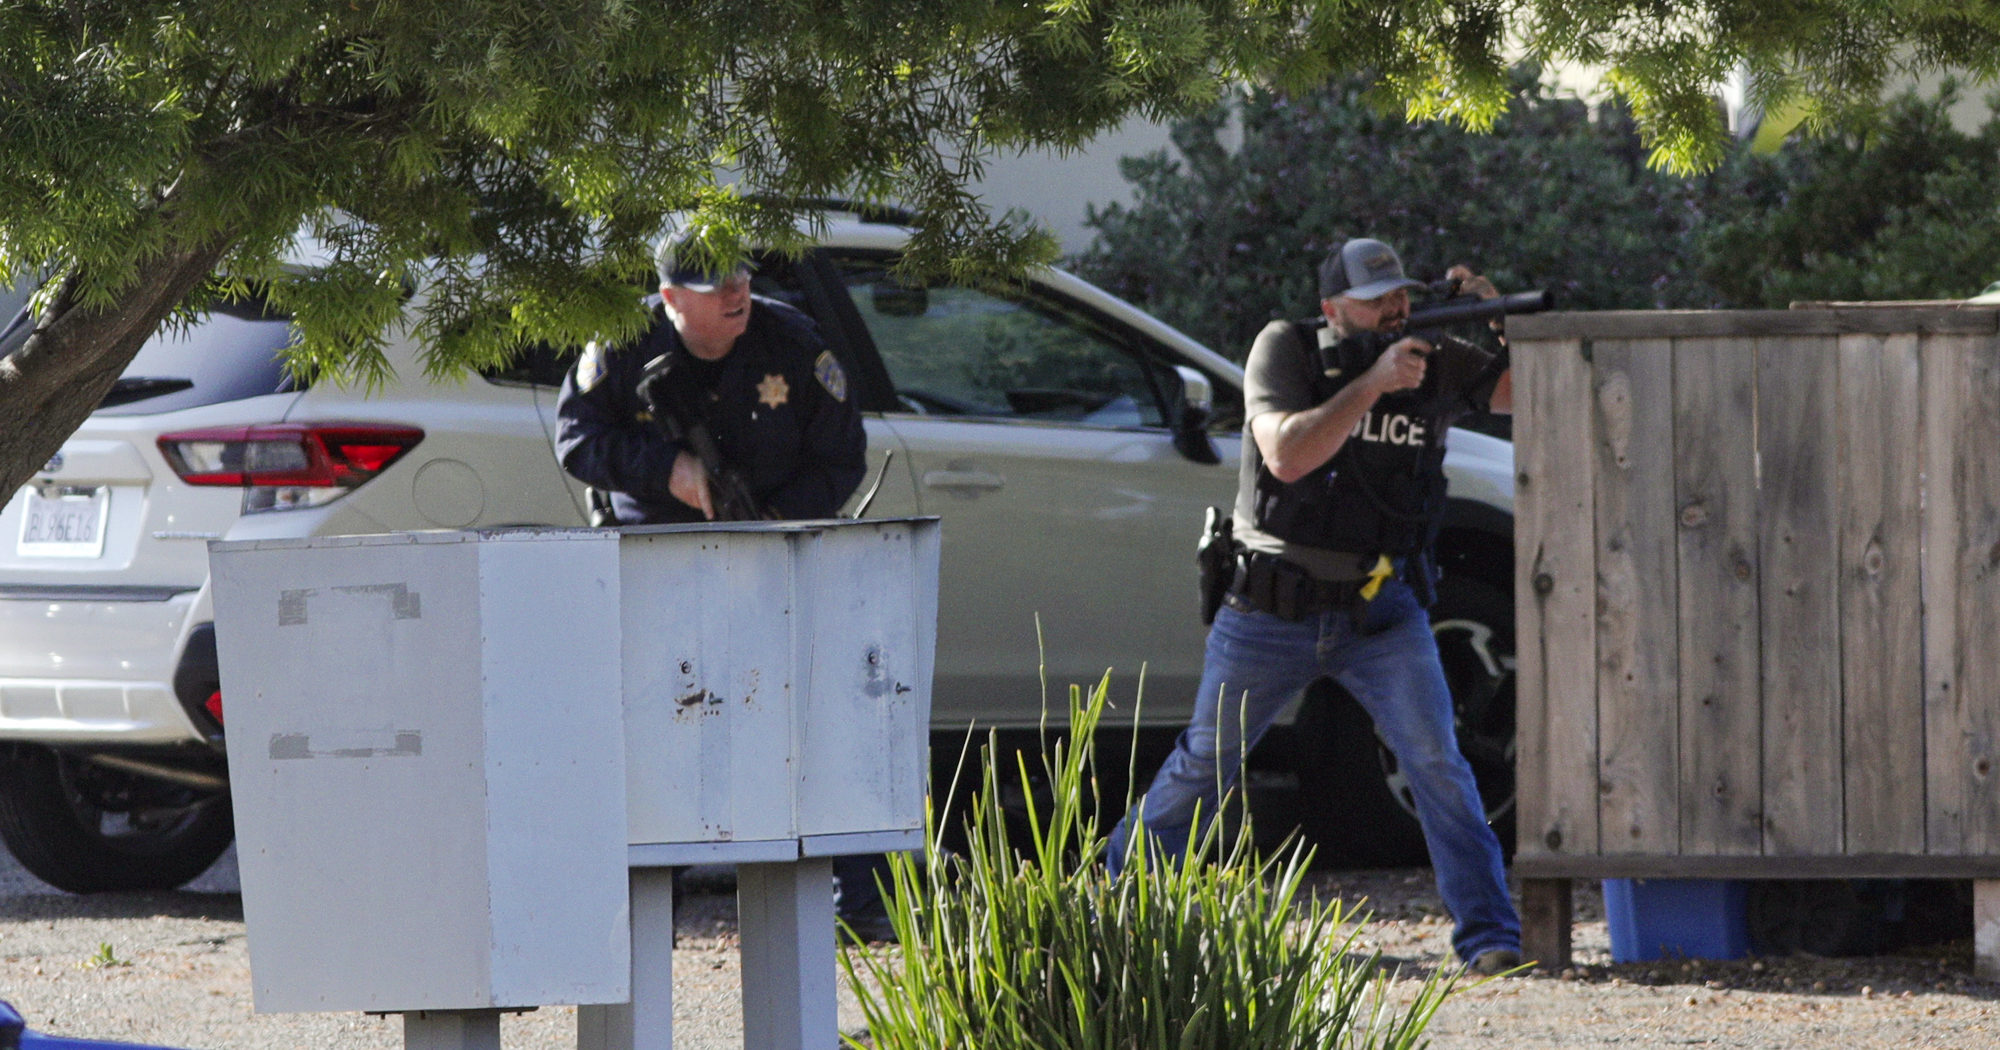 Officers take aim at an apartment across Camilla Court, Monday, May 10, 2021, in San Luis Obispo, Calif. Police said two police officers have been shot while serving a search warrant and the suspect has died. (Officers take aim at an apartment on Monday in San Luis Obispo, California.